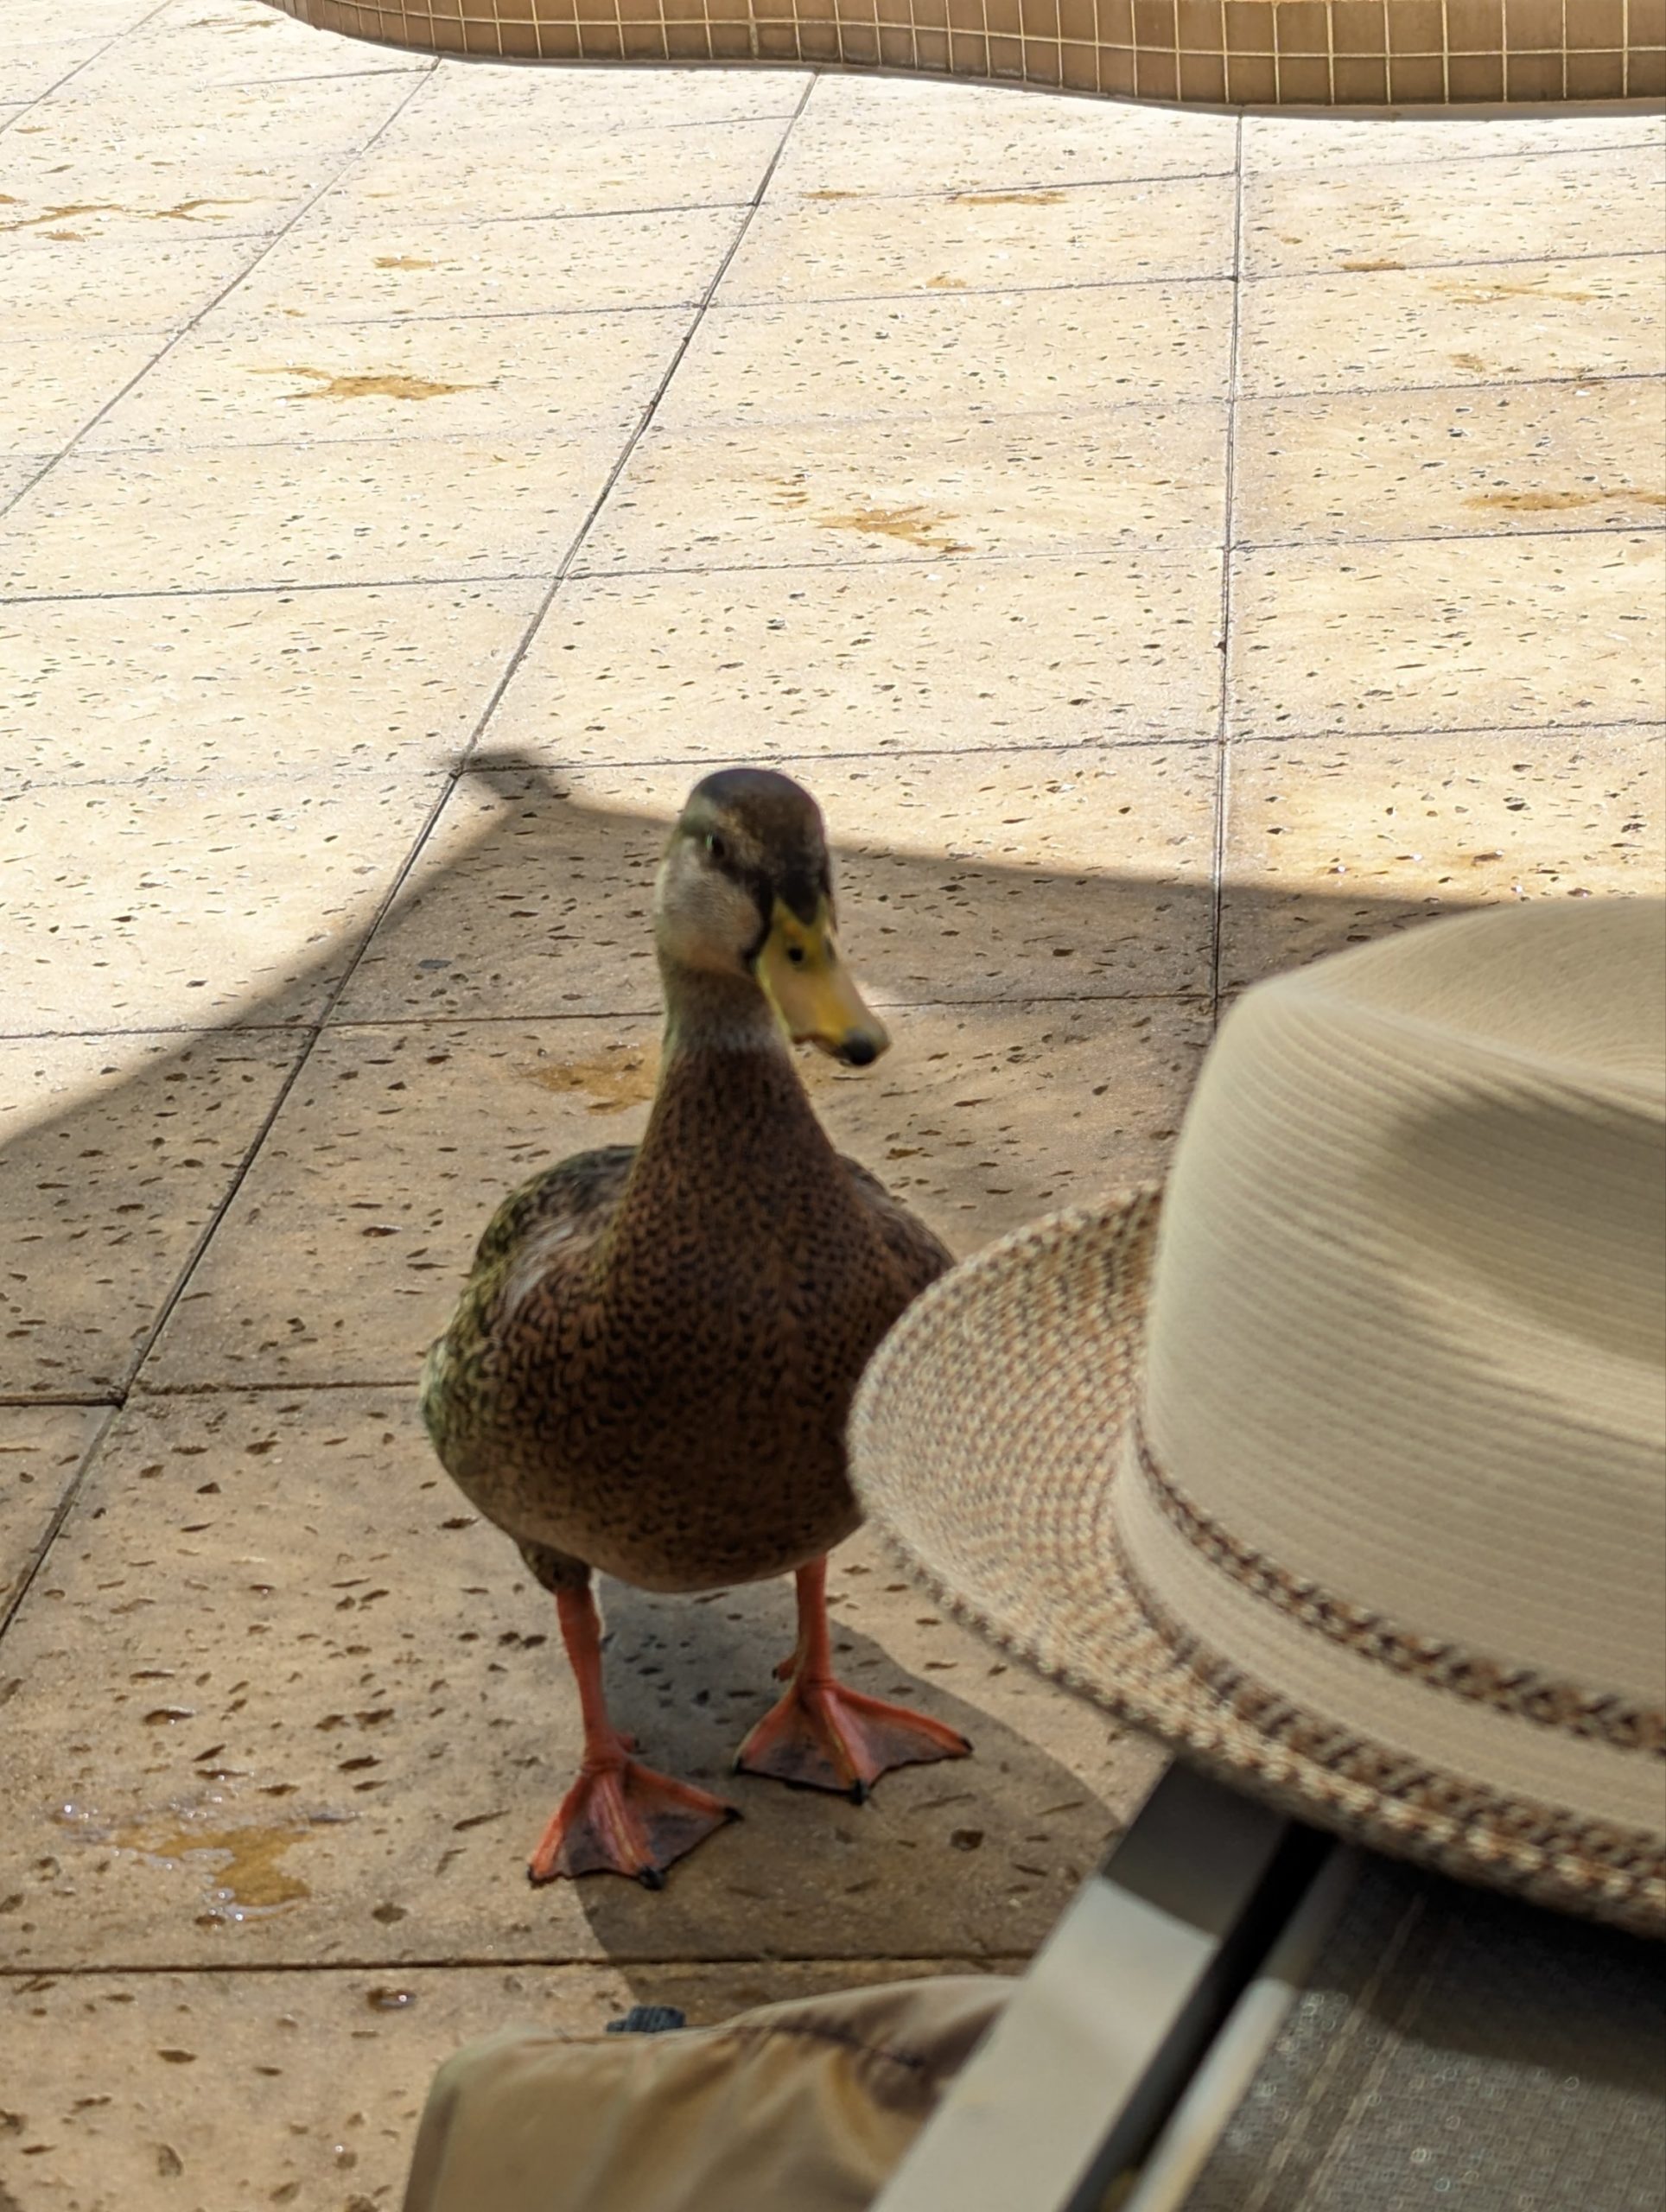 a duck standing on a sidewalk next to a hat